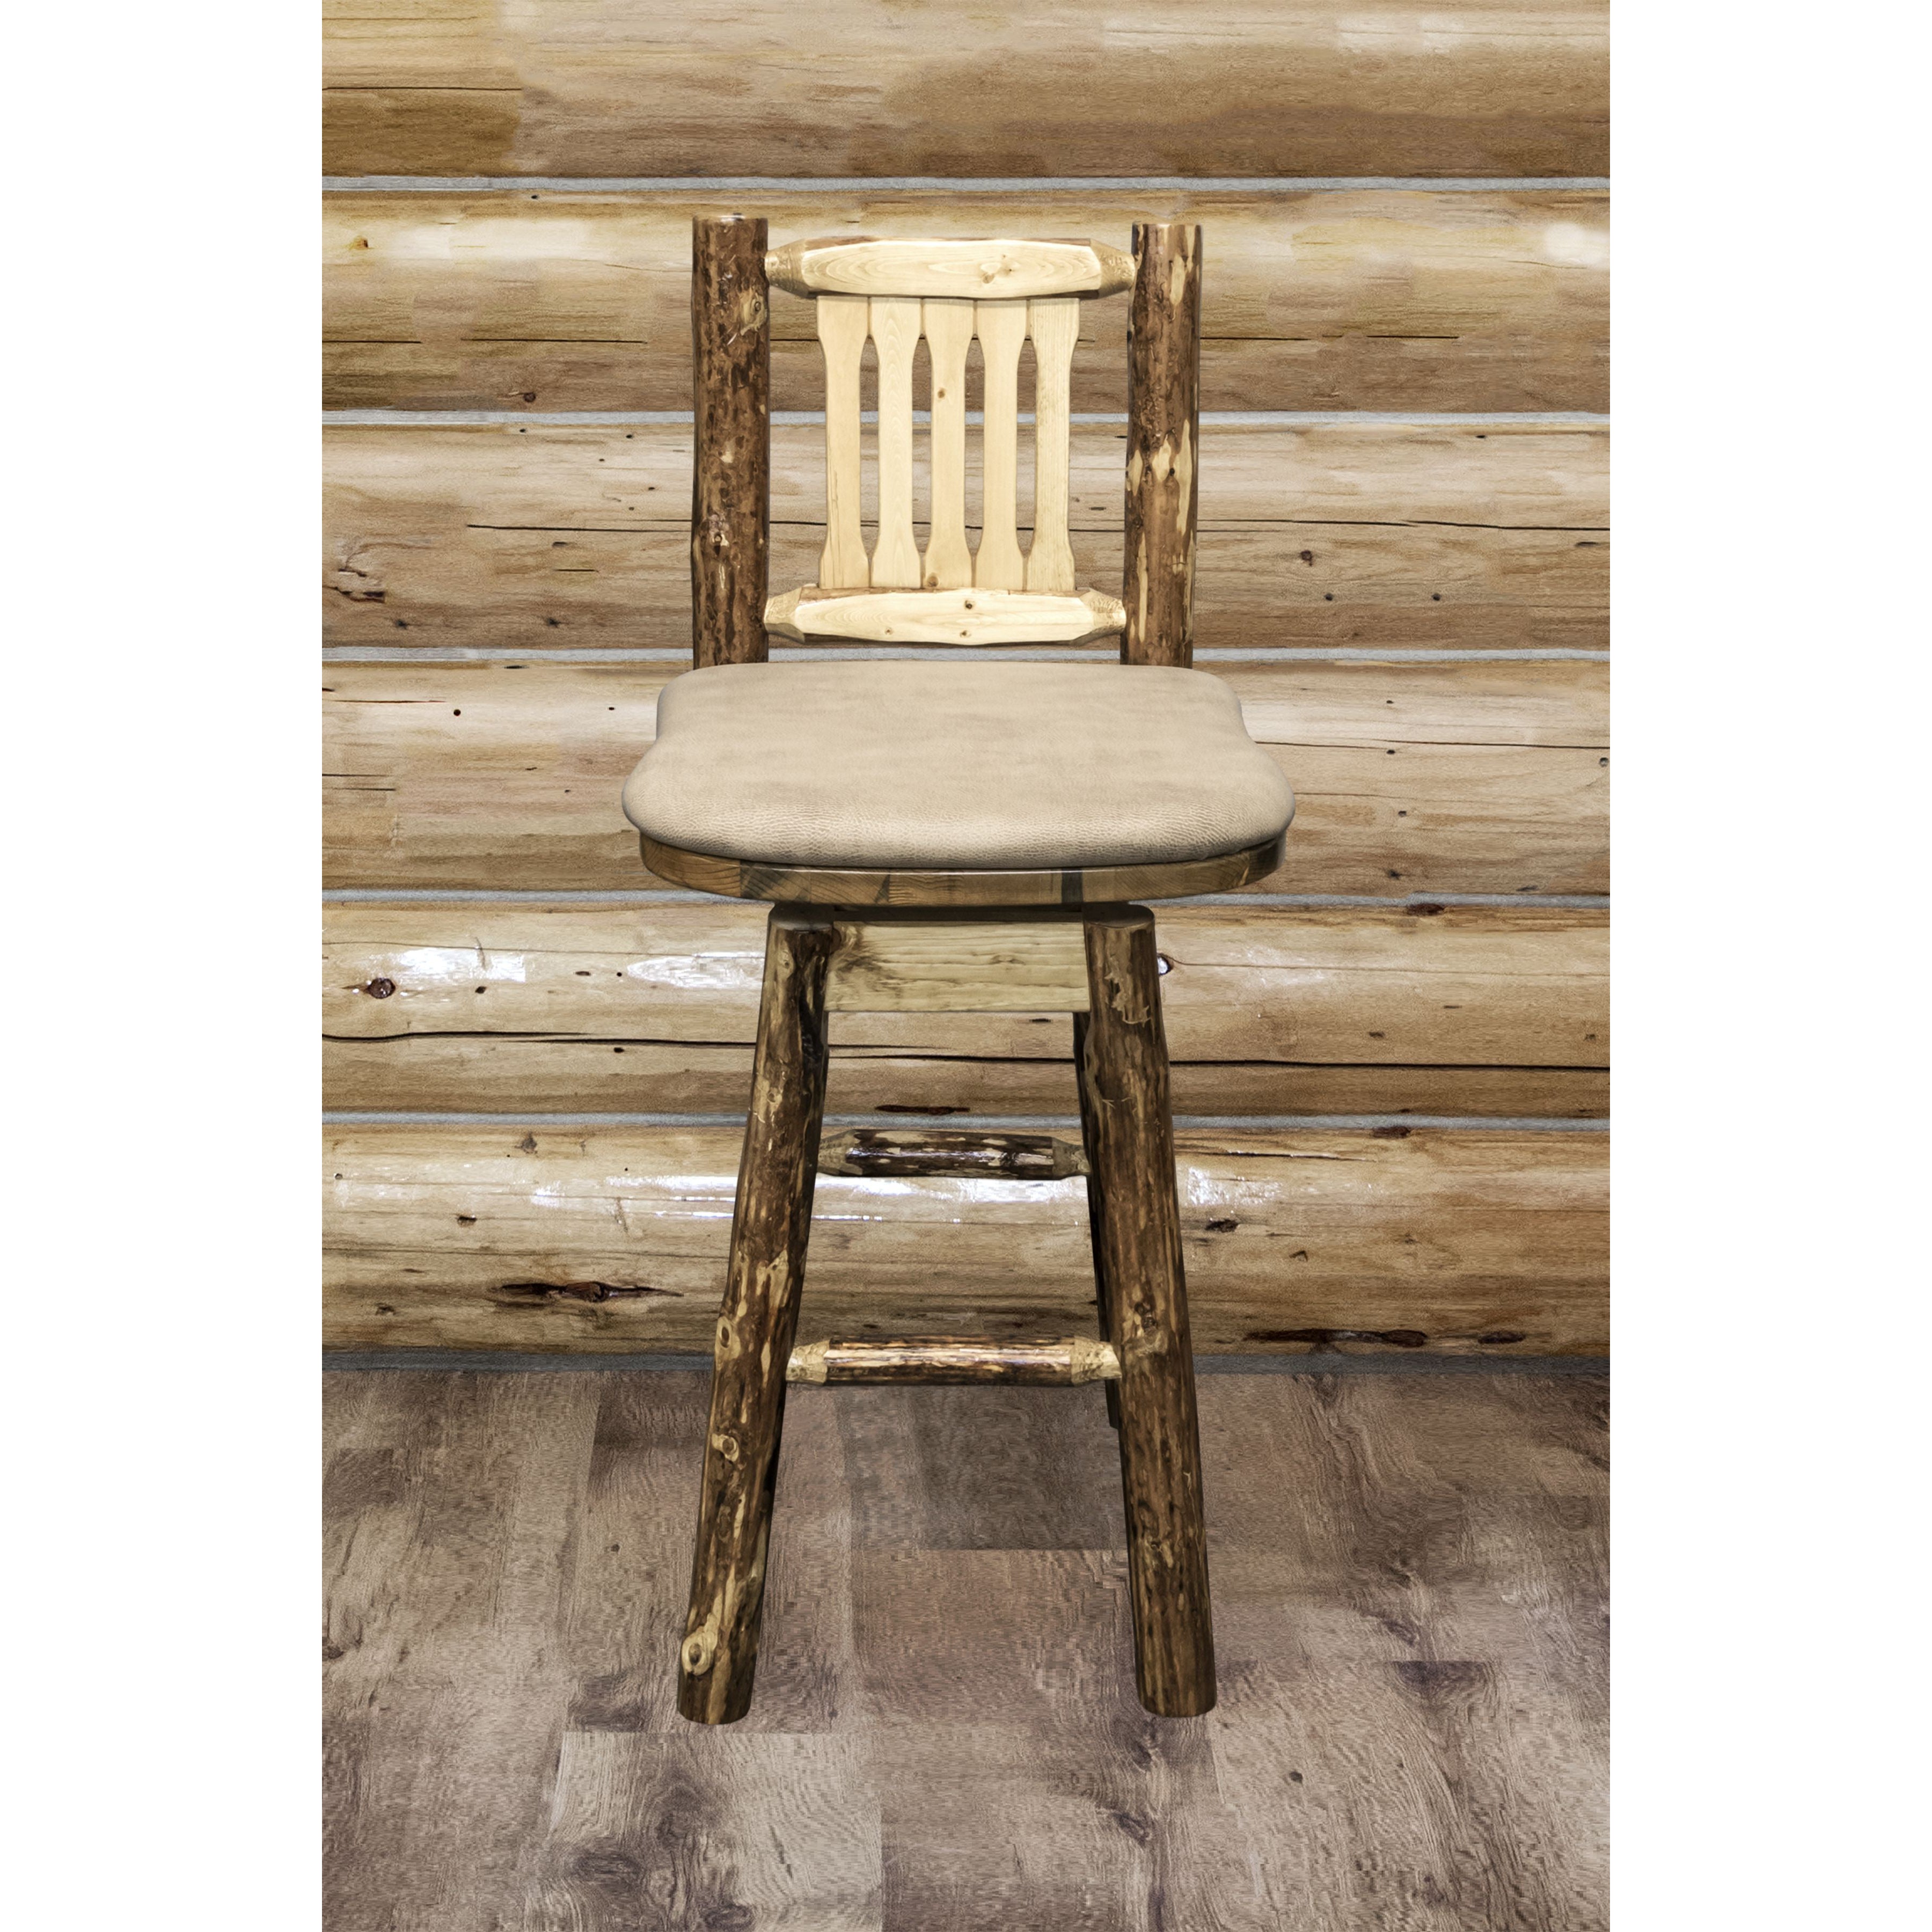 montana woodworks glacier country collection-barstool with back swivel mwgcbswsnrbuck buckskin patter upholstered seat indoor